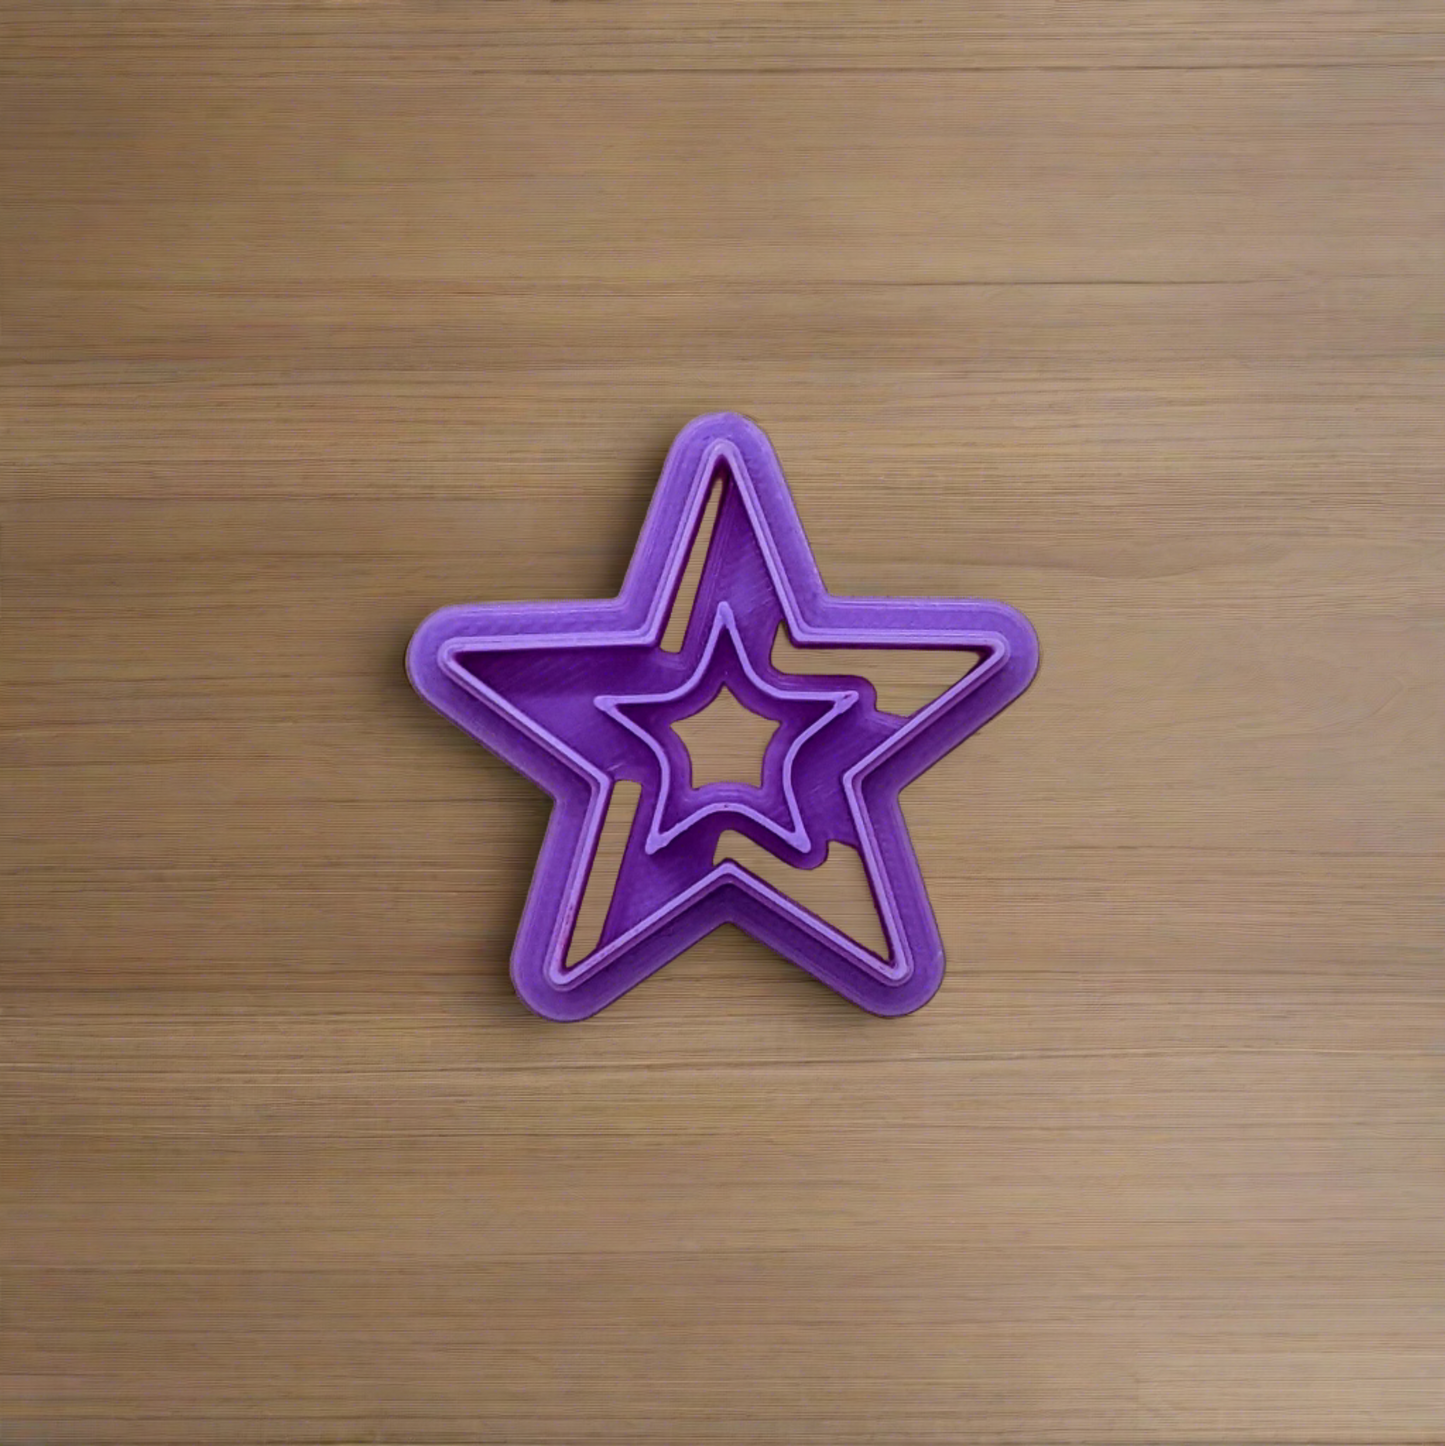 Star Shape Donut Cutter: Versatile Tool for Ceramics, Pottery, Polymer Clay, Fondant & More